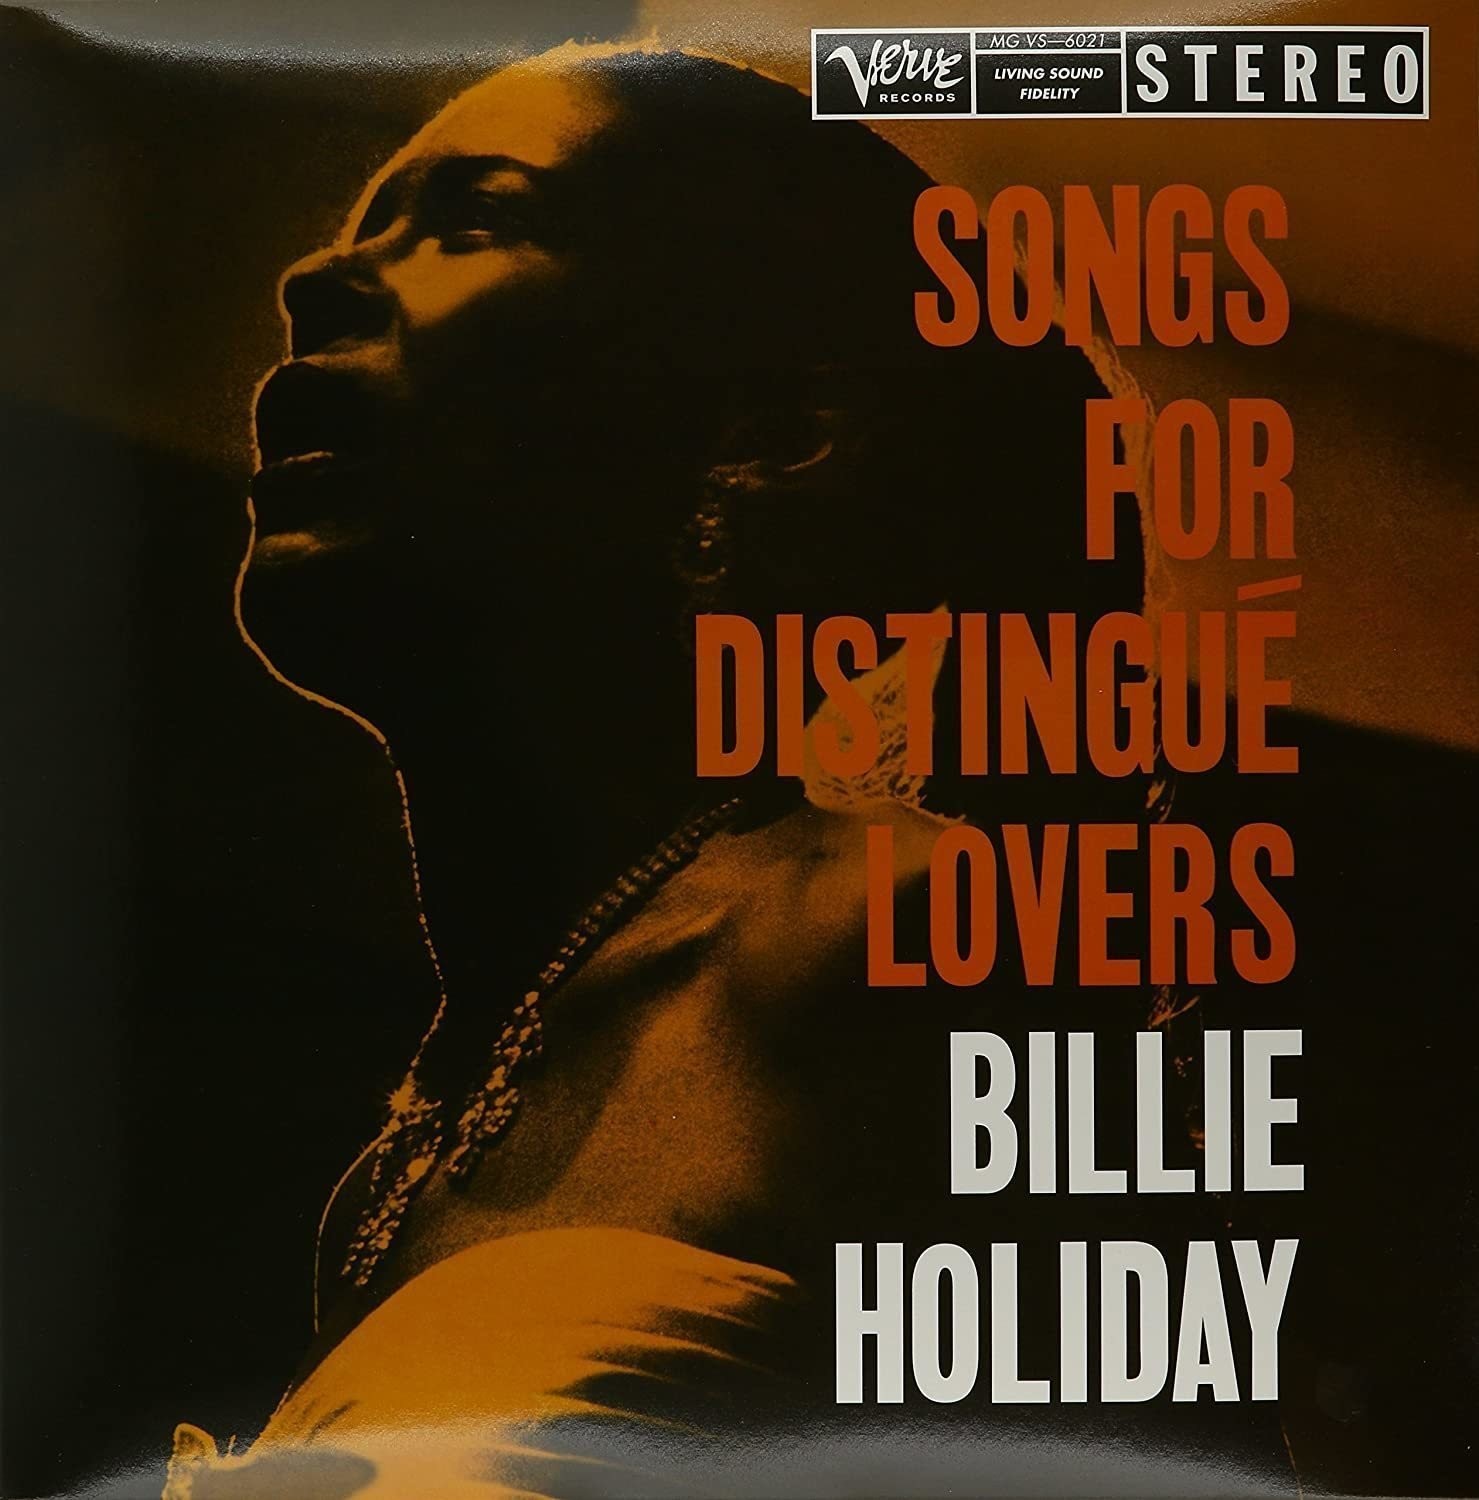 Billie Holiday - Songs For Distingue Lovers (2 LP)